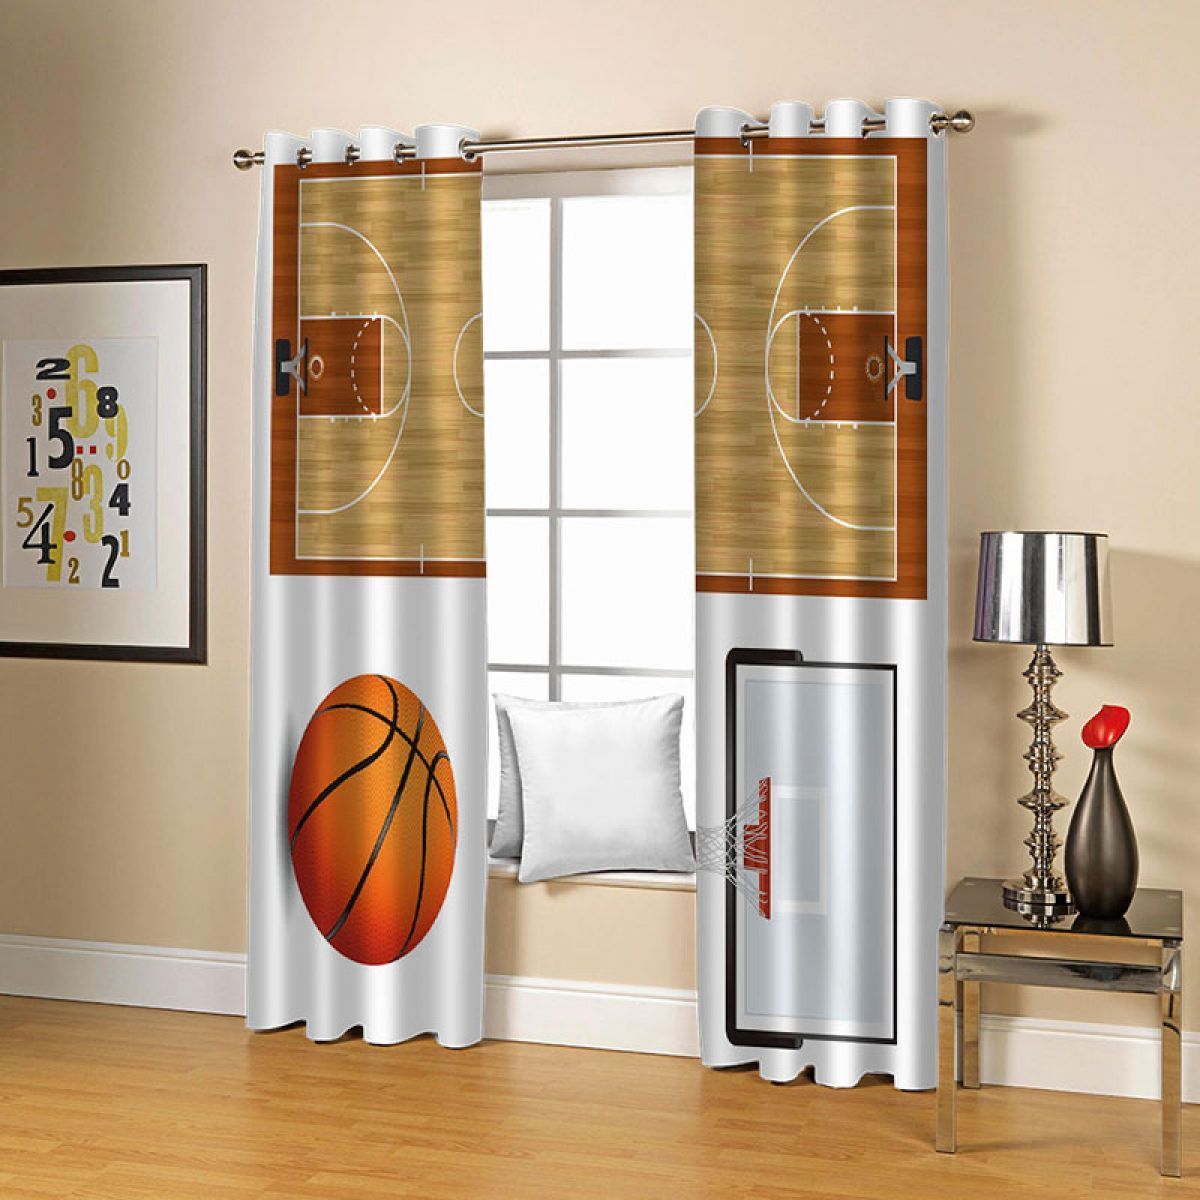 3d Basketball And Court Printed Window Curtain Home Decor